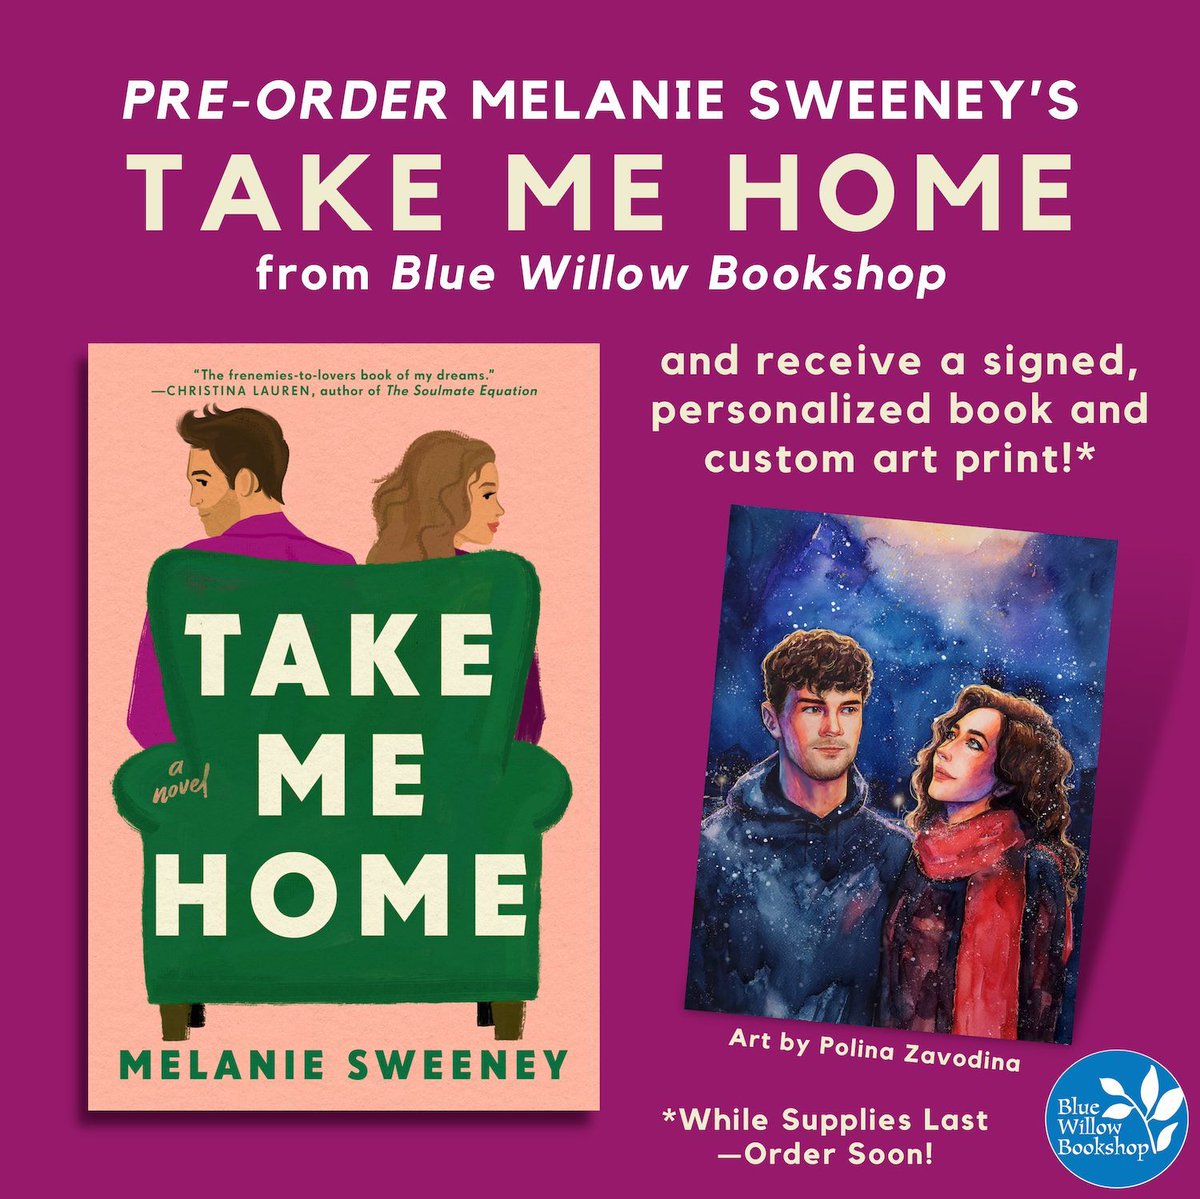 We're delighted to partner with @mellie_sweeney on the pre-order campaign for her debut novel, TAKE ME HOME! ✨ Order your copy with us to receive custom art with your signed (and personalized, if you want!) book! See details here: bluewillowbookshop.com/pre-order-take… @PutnamBooks